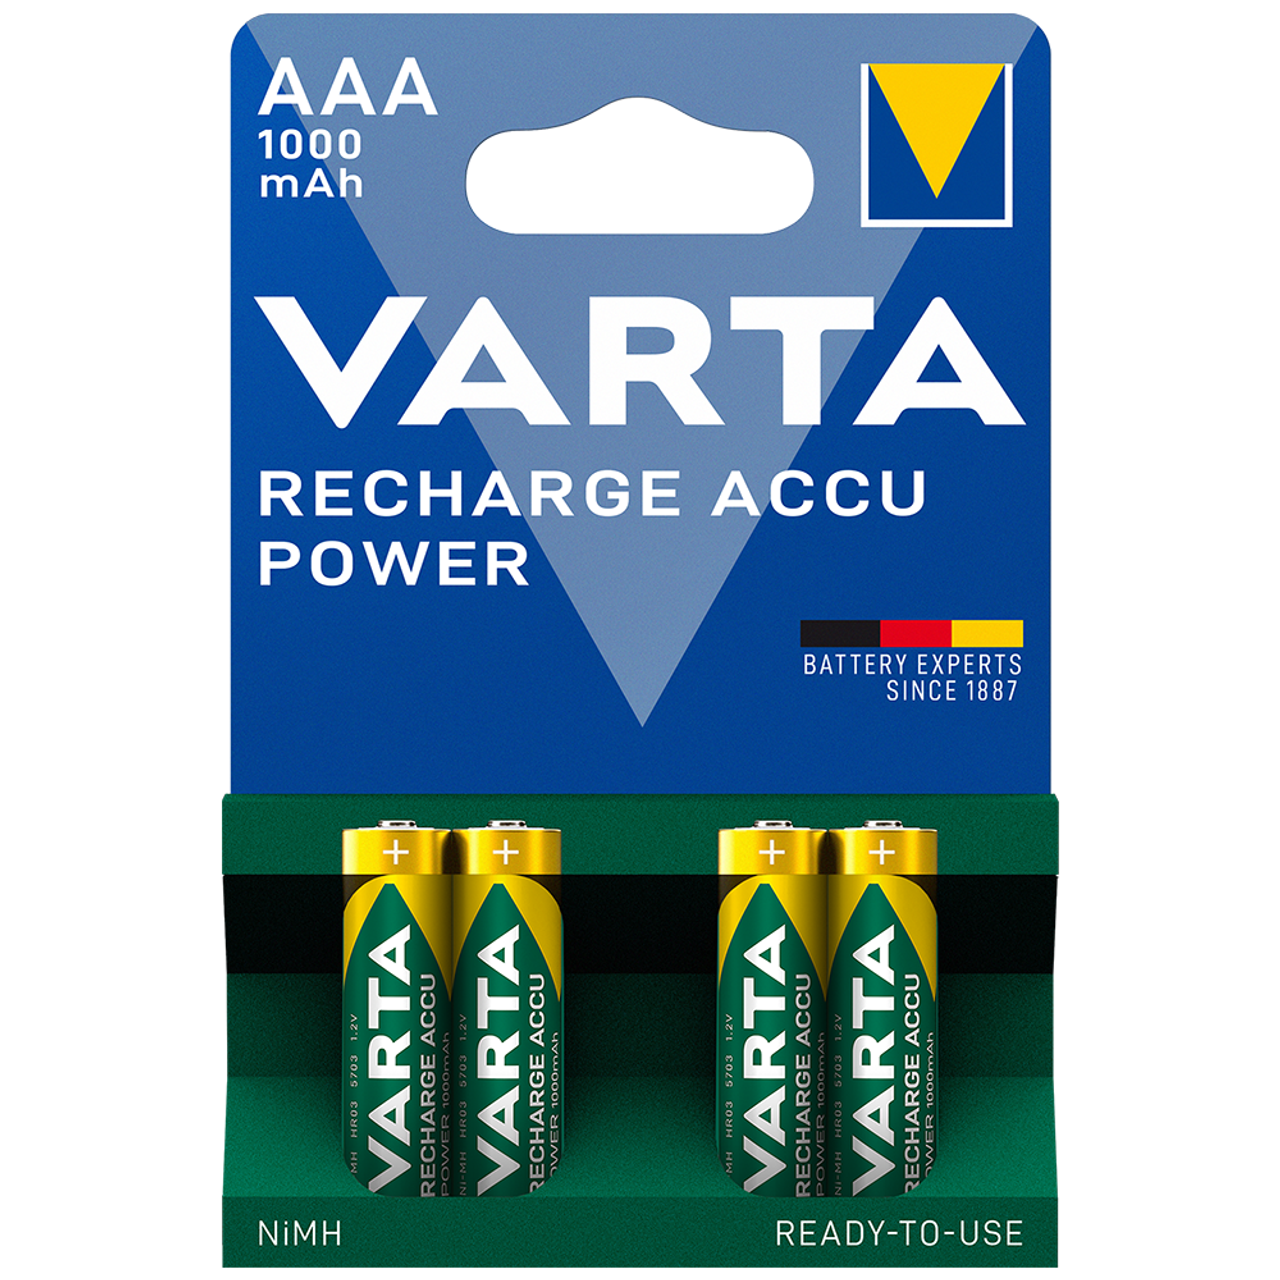 Duracell AAA Nimh Rechargeable Batteries (4 Pack)